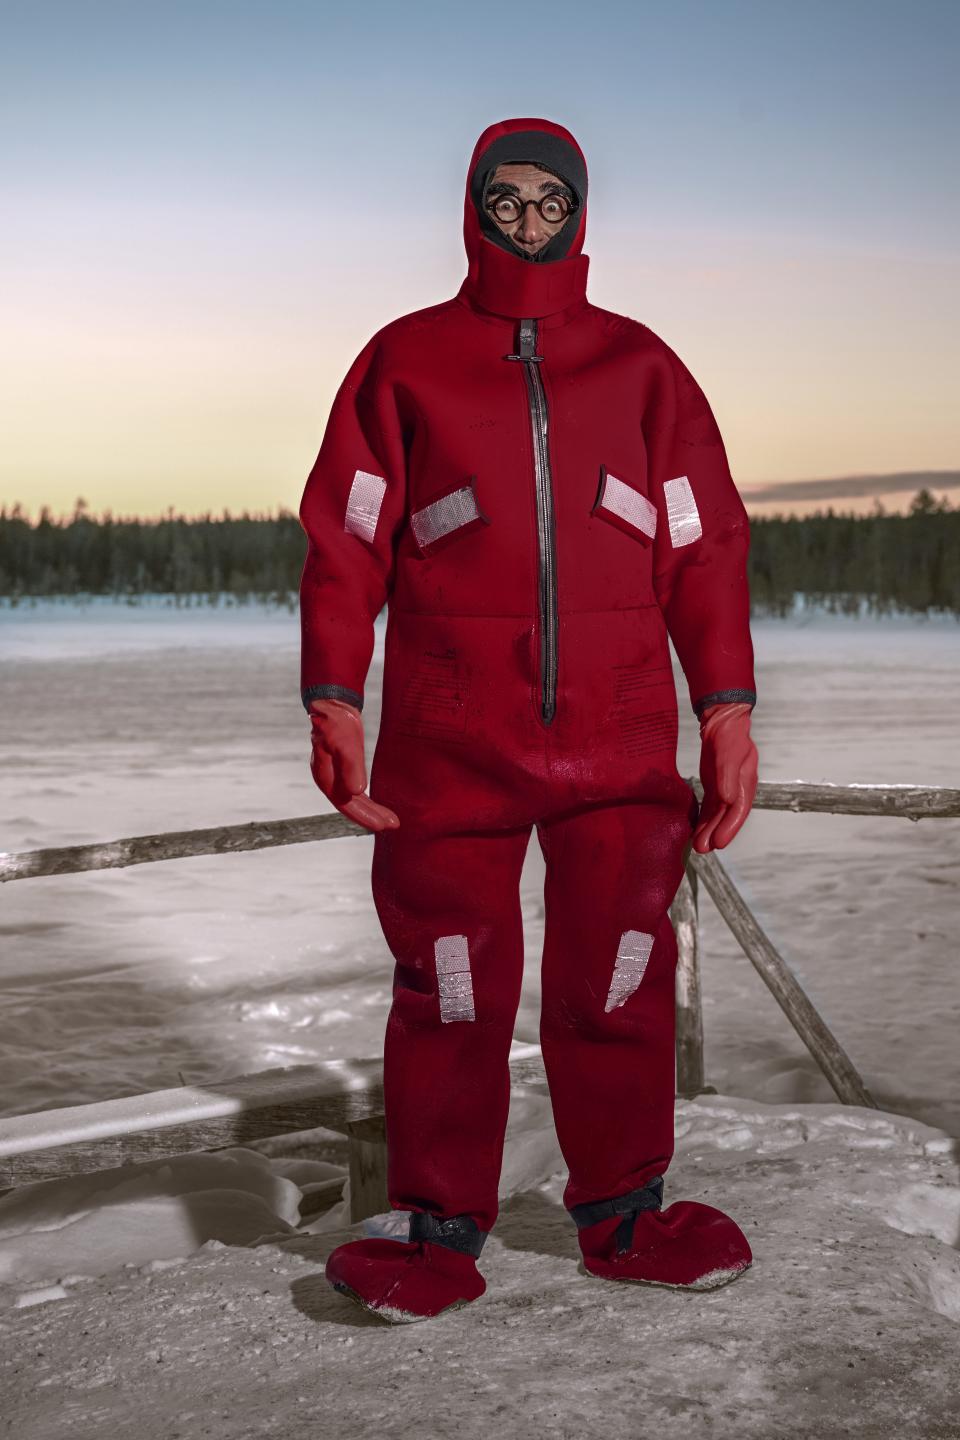 Eugene Levy gets ready for an icy plunge in Finland for "The Reluctant Traveler" on AppleTV+. "Water is not my thing. I'm not a strong swimmer," he says.